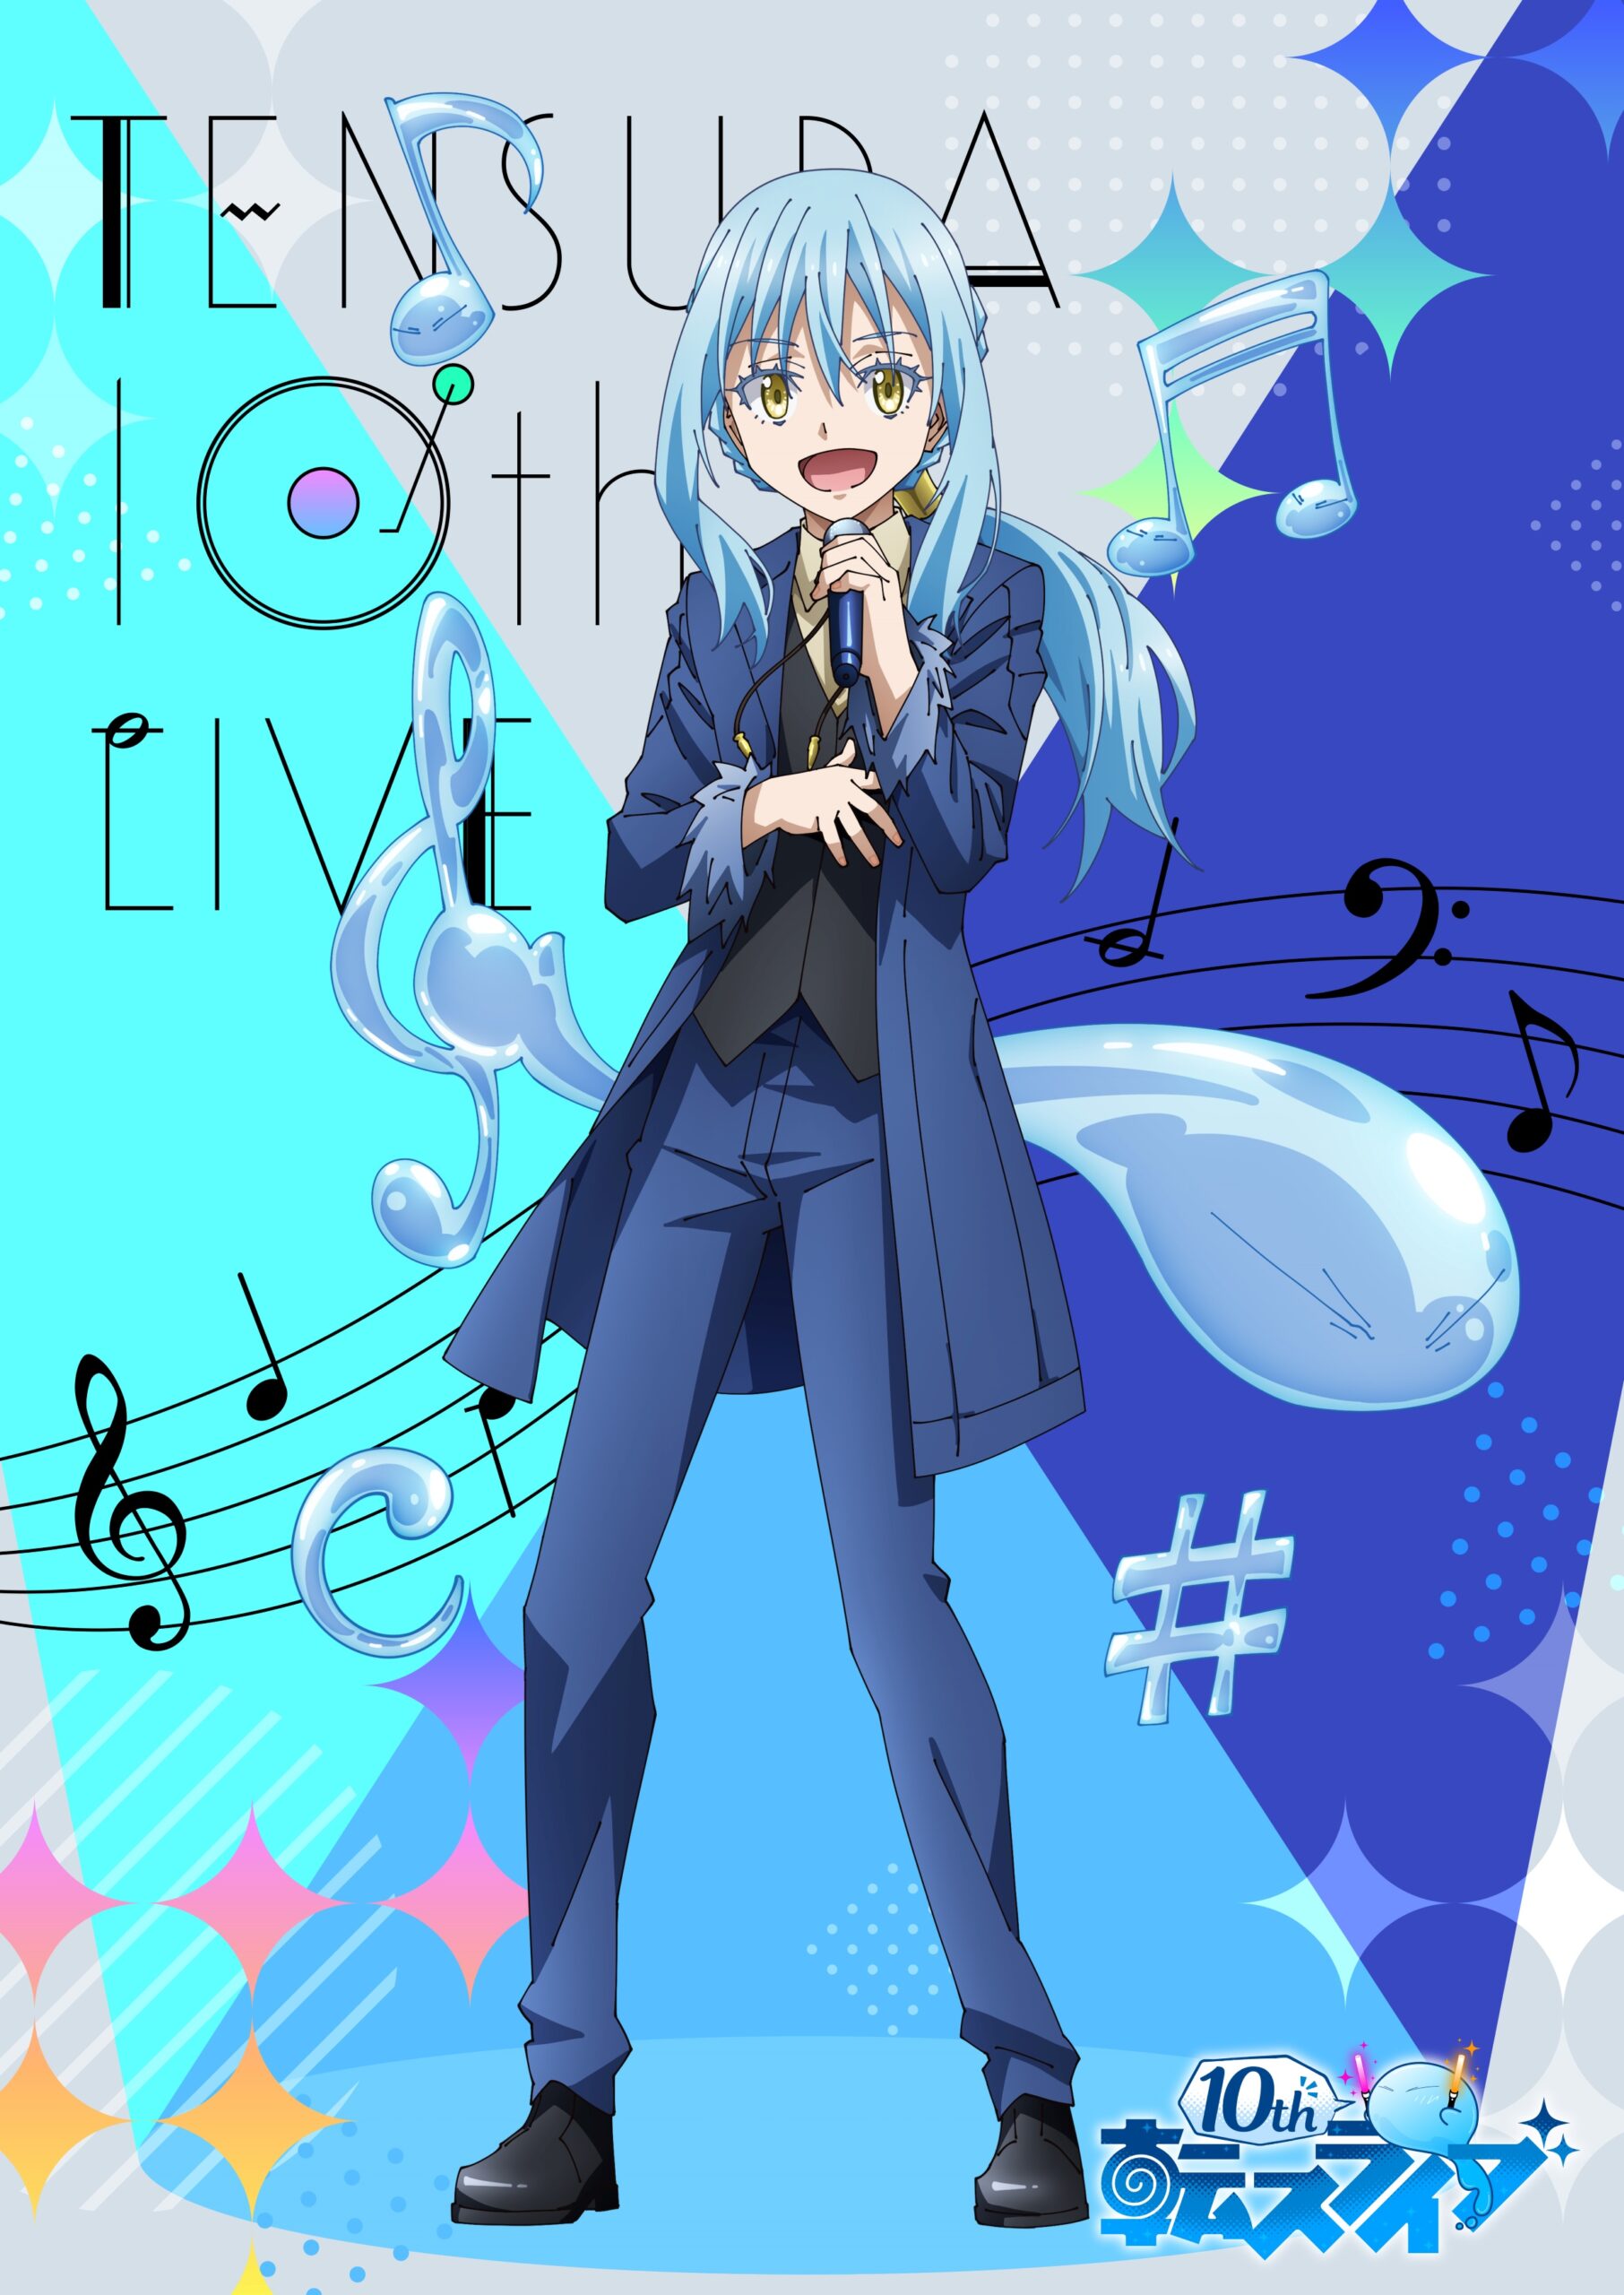 That Time I Got Reincarnated as a Slime Announces Large-Scale Live Event  for 10th Anniversary - Anime Corner